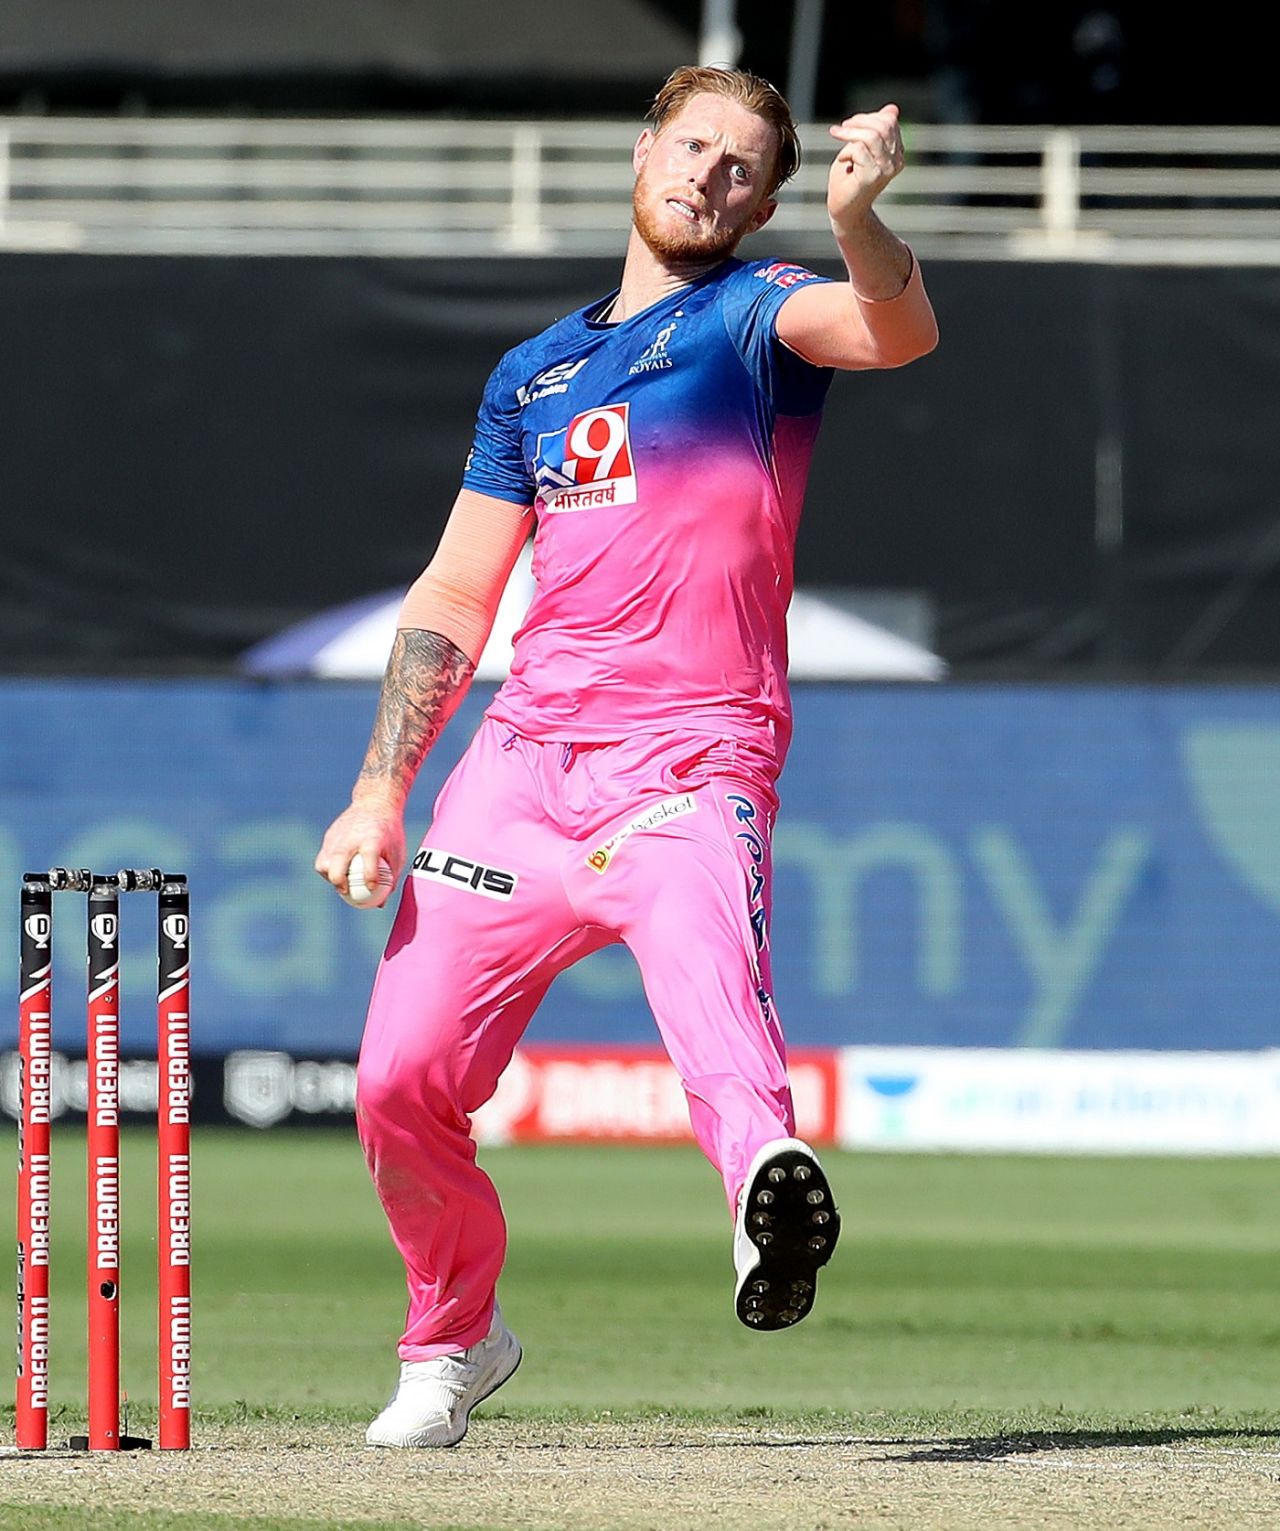 Ben Stokes has a bowl in his first match of the season, Sunrisers Hyderabad vs Rajasthan Royals, IPL 2020, Dubai, October 11, 2020